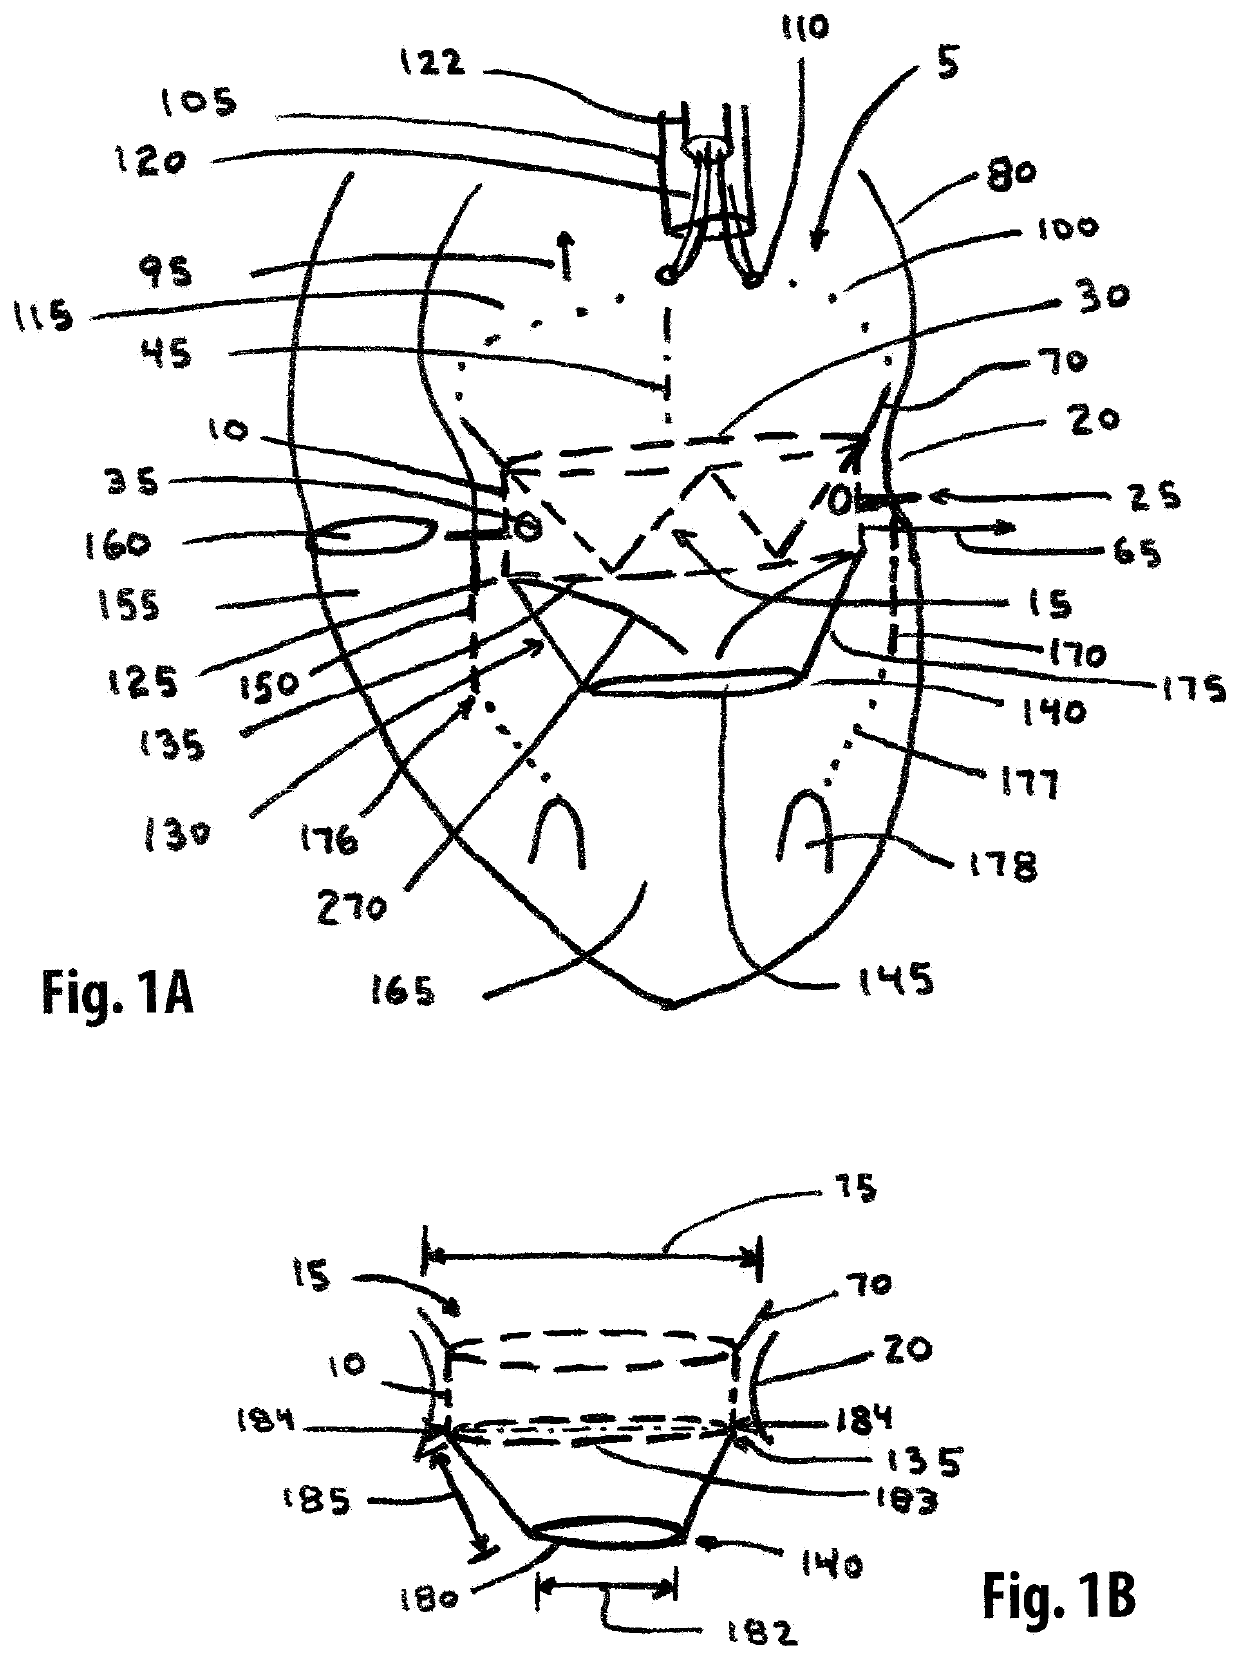 Annuloplasty device and methods